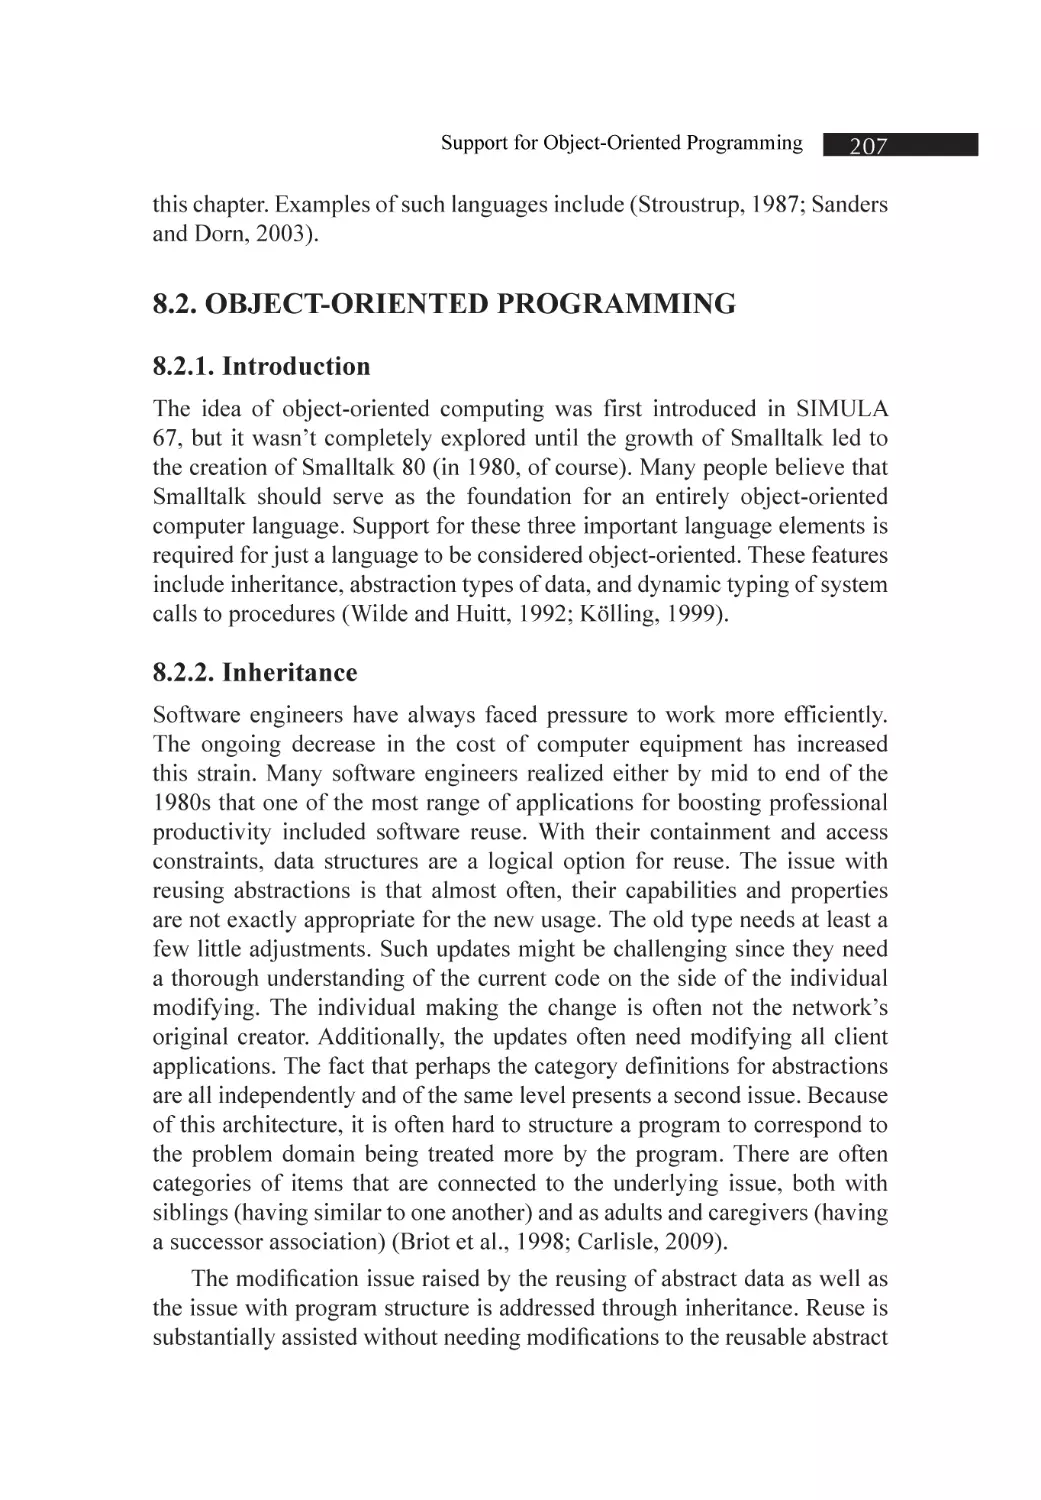 8.2. Object-Oriented Programming